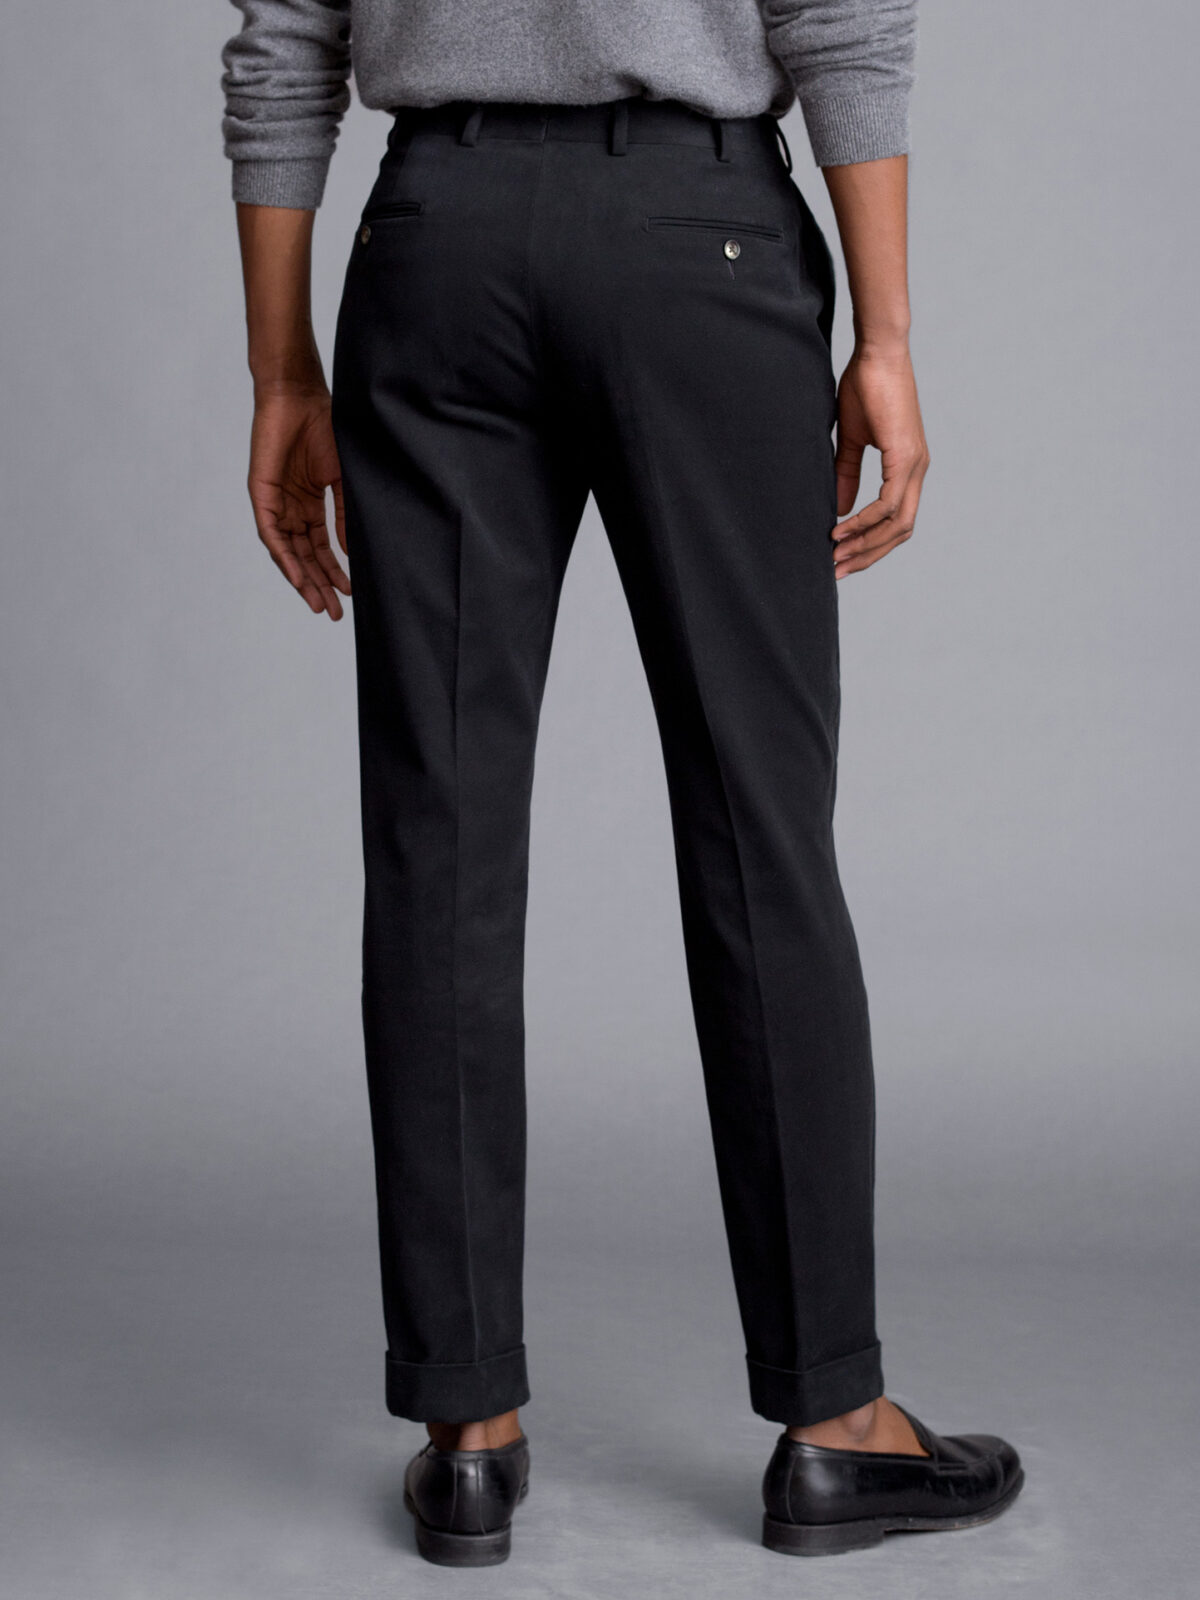 Poly Viscose Slim Fit STRETCHABLE FORMAL TROUSERS at Rs 350 in Mumbai-mncb.edu.vn